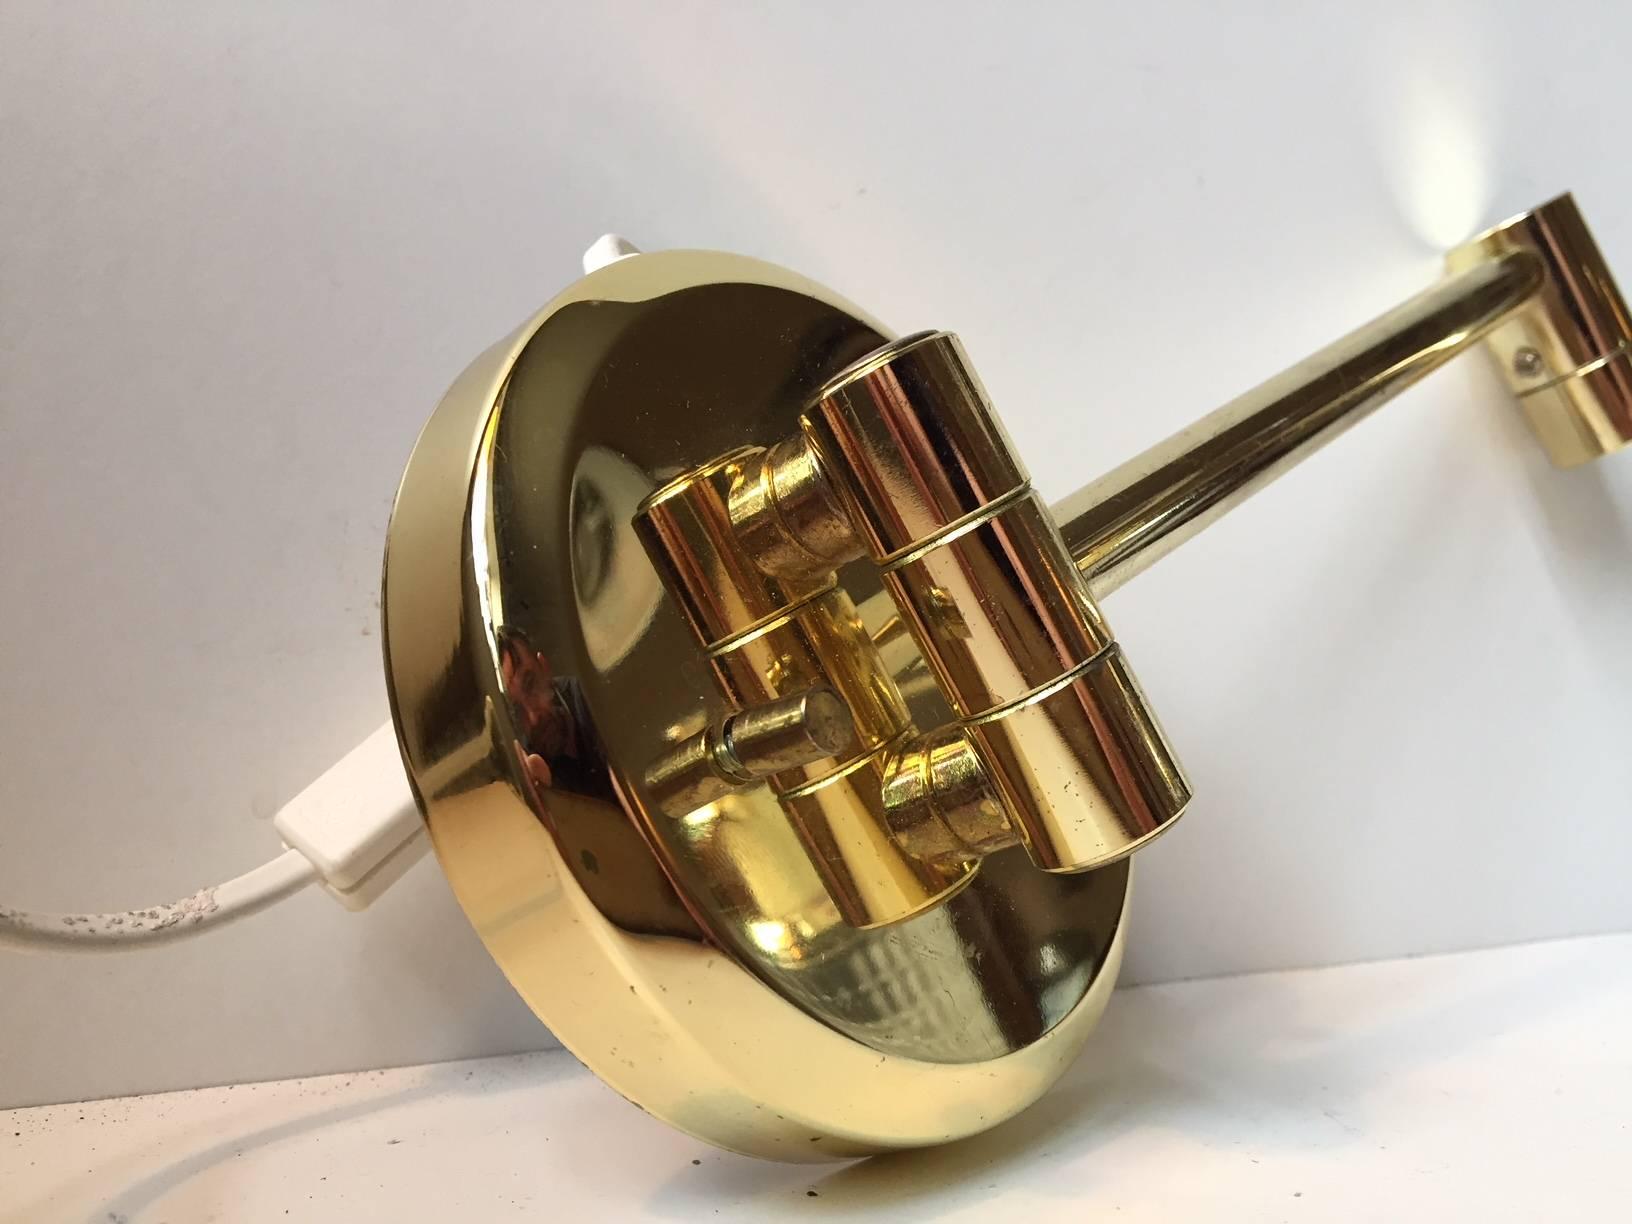 Polished Vintage Danish Anglepoise Brass and Glass Wall Lamp from ABO, 1980s